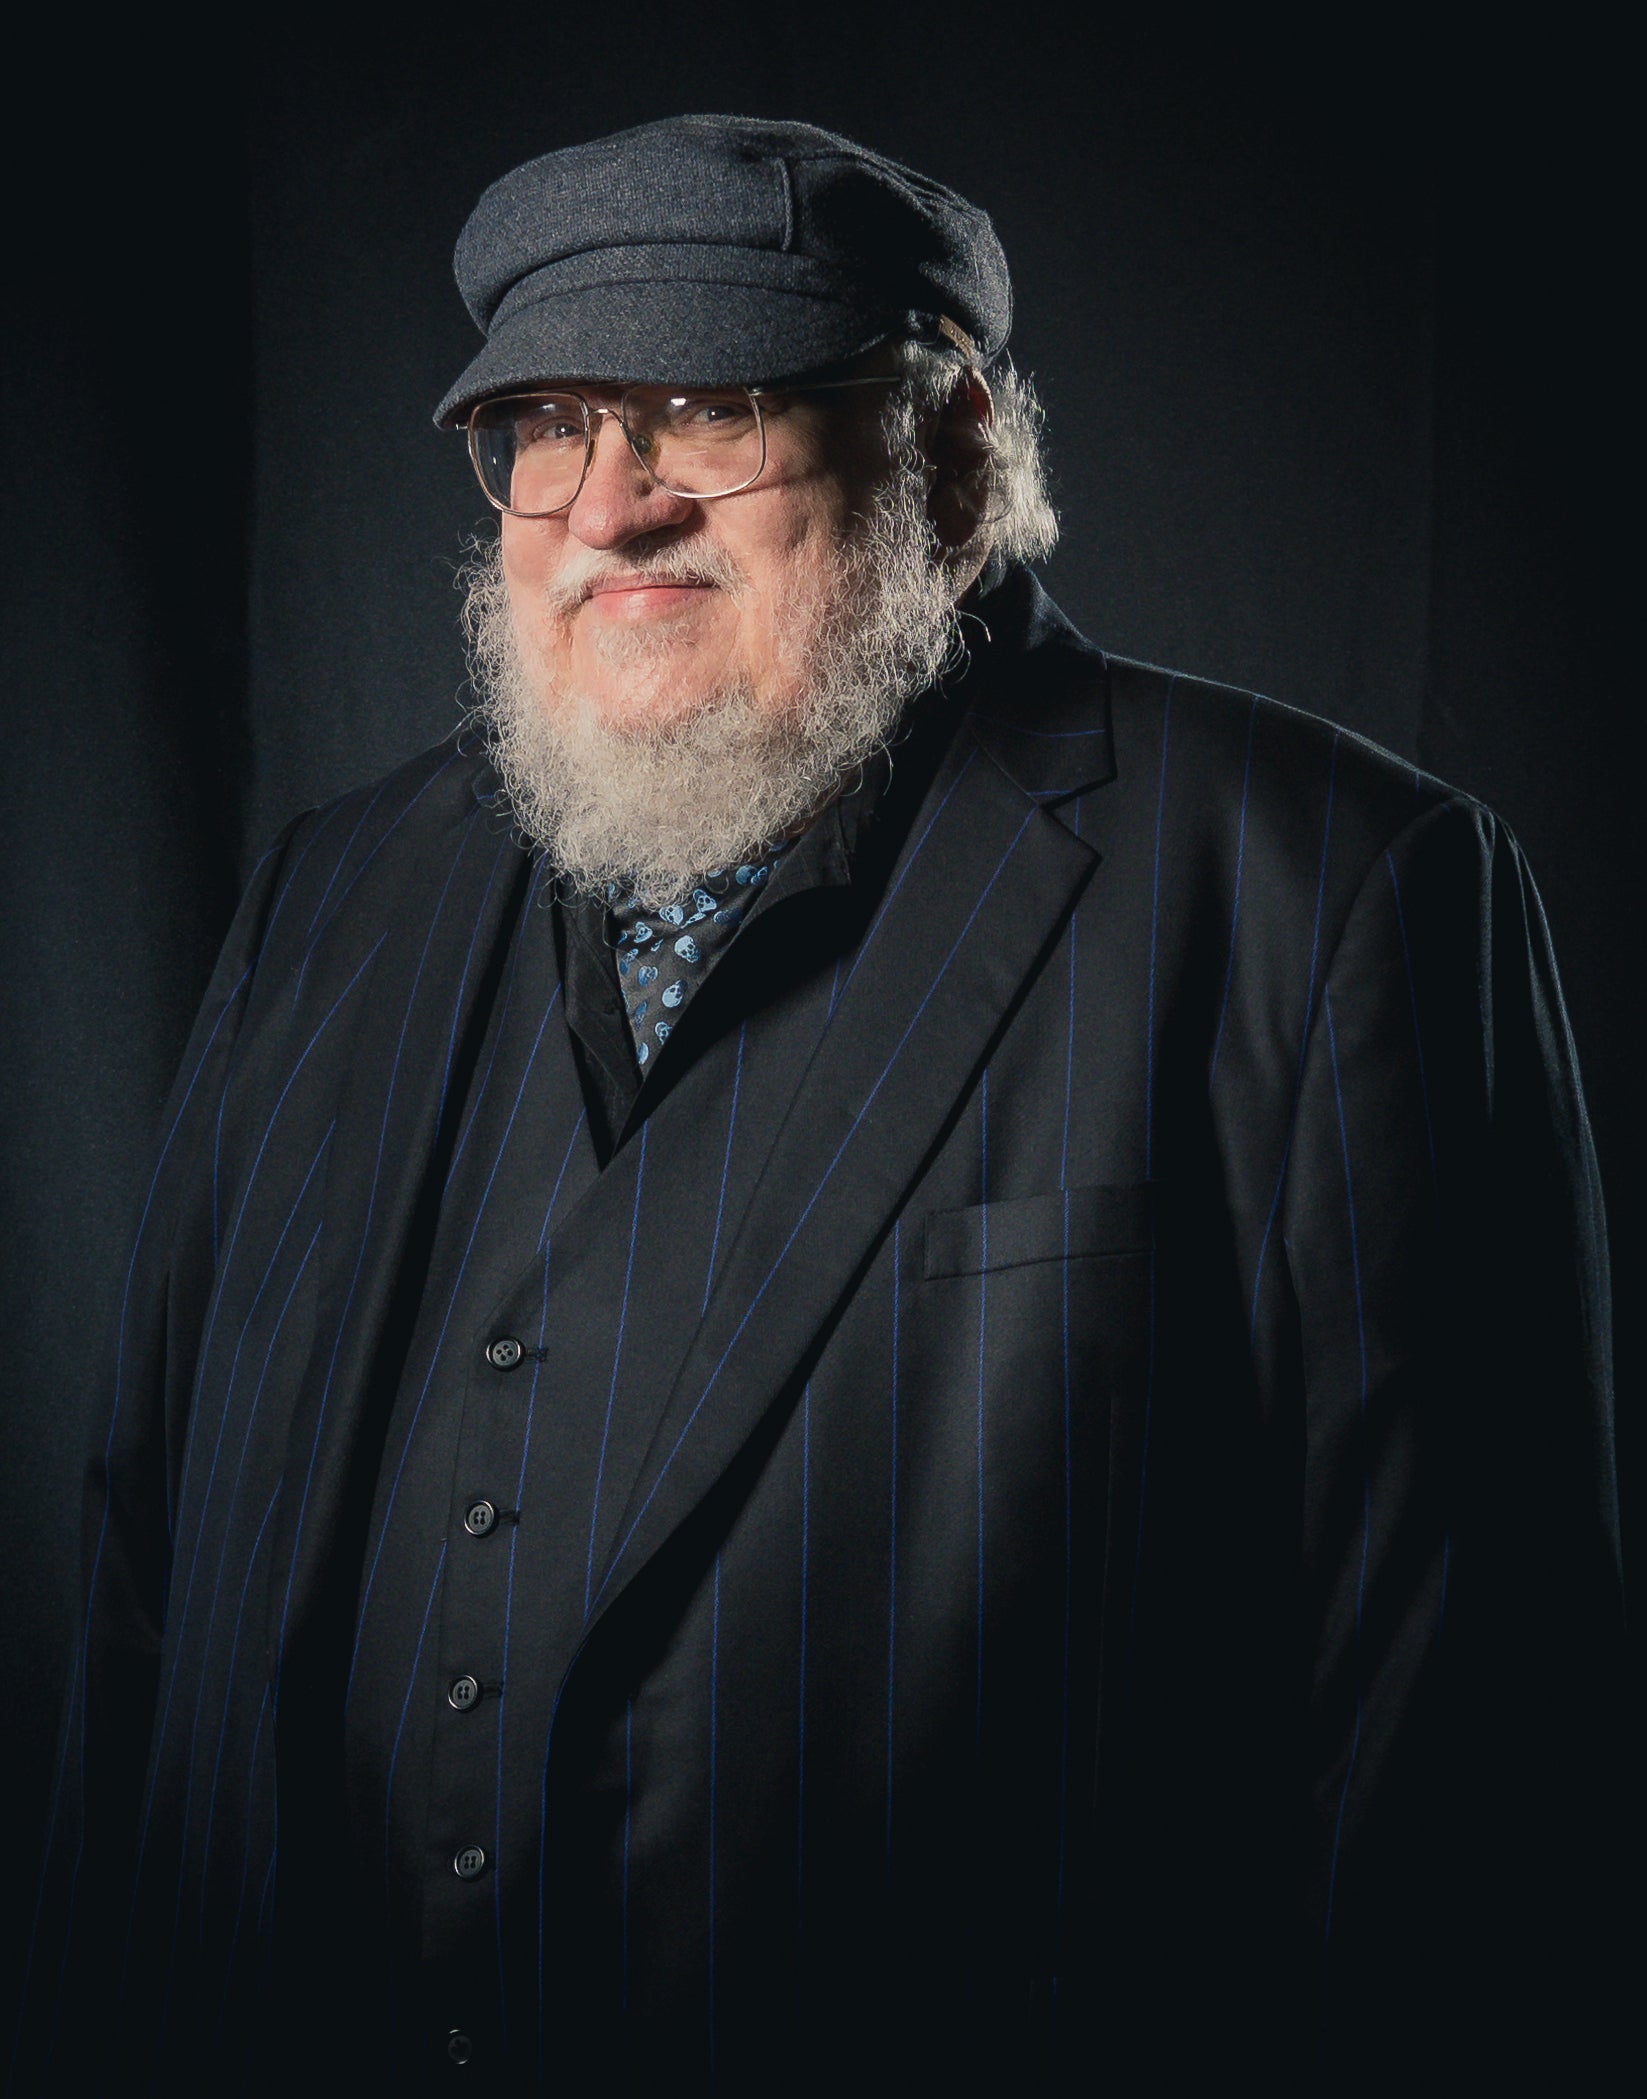 The presence of George R.R. Martin's name in the game's marketing may have played a role in its success. (Photo: Henry Söderlund)